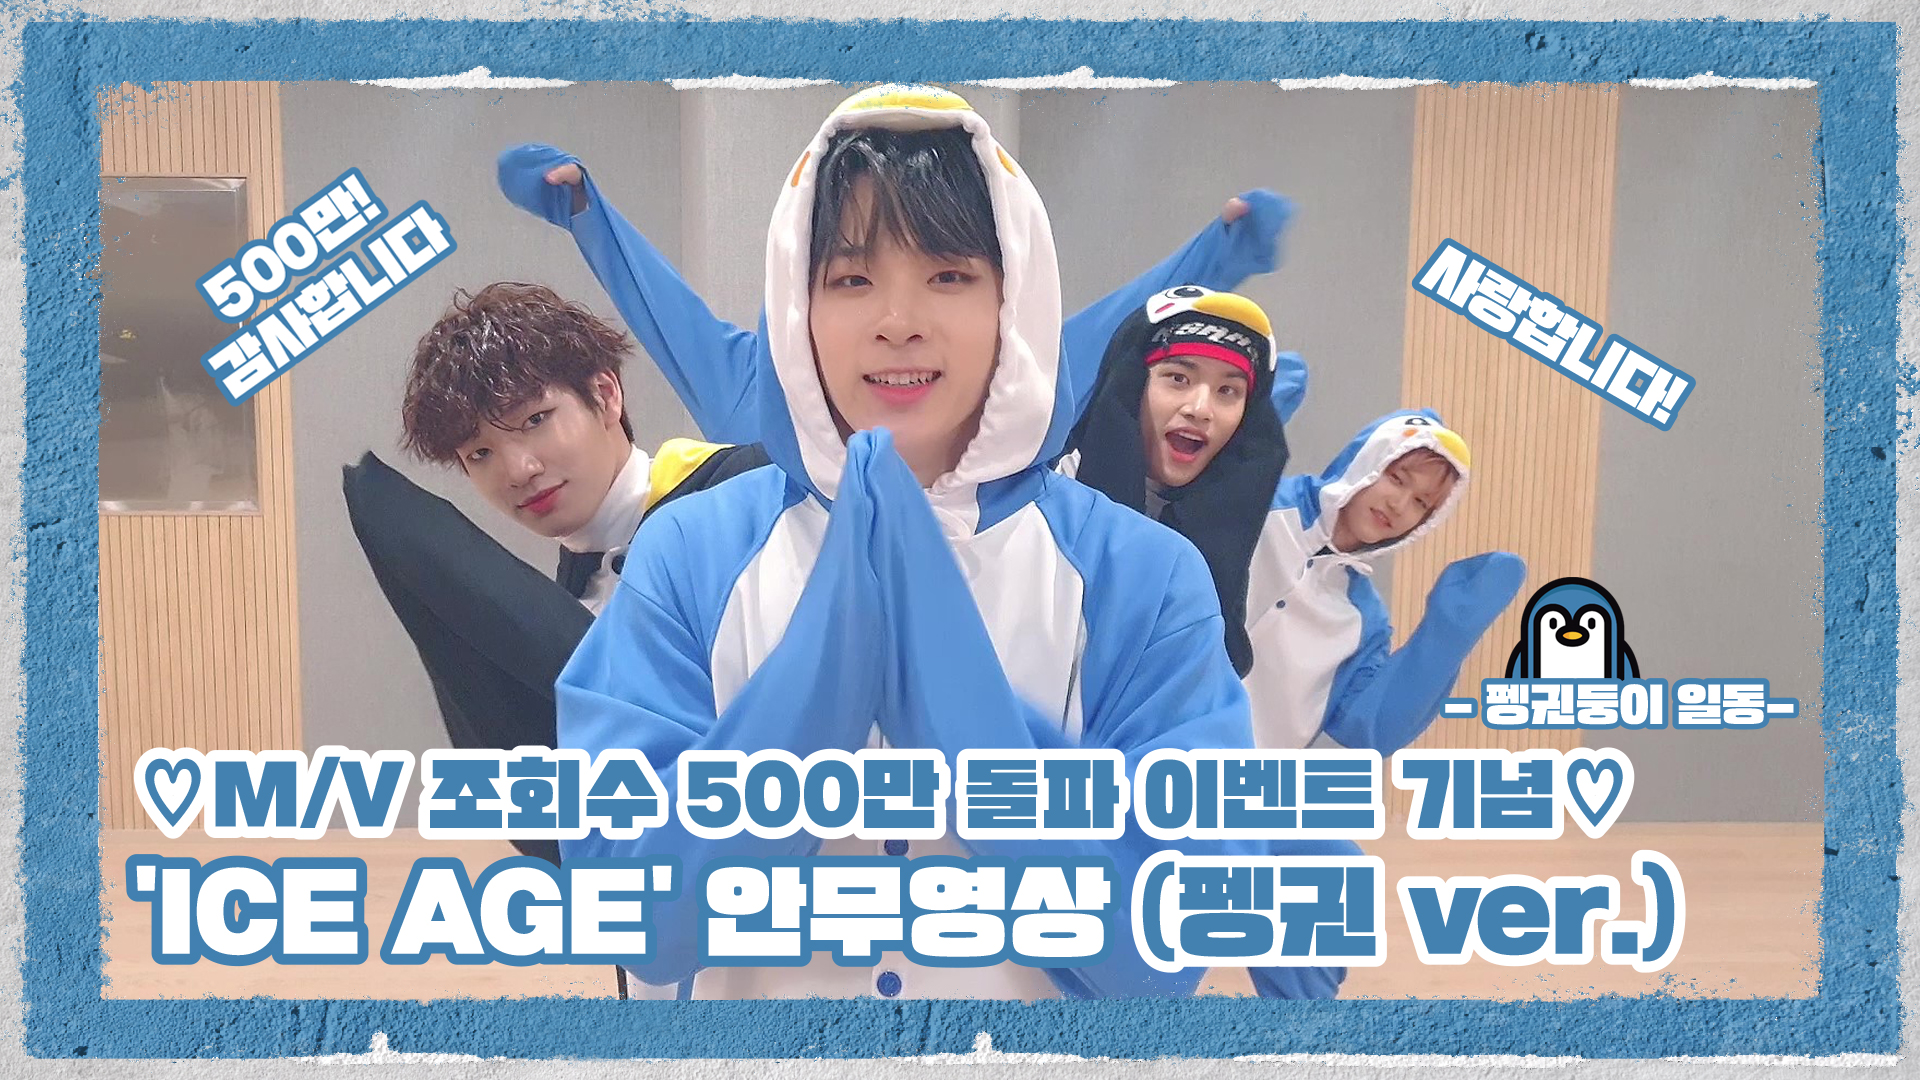 [Let's Play MCND] #MCND 'ICE AGE' 안무영상 (펭귄 ver.)ㅣSpecial Video